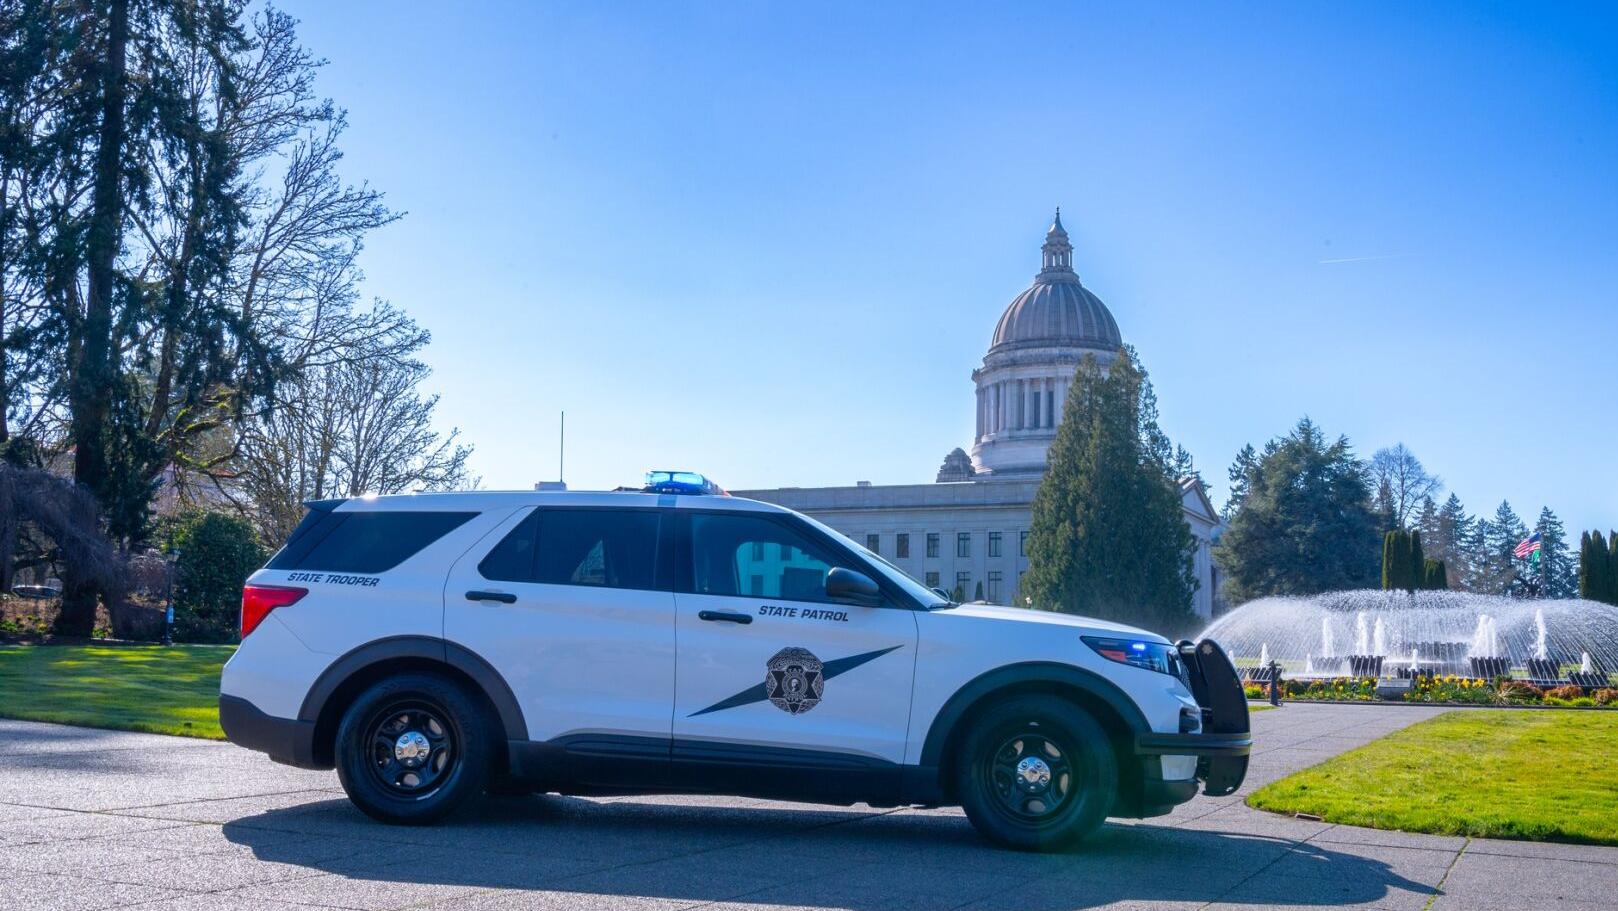 Washington State Patrol wants students interested in law enforcement careers [Video]